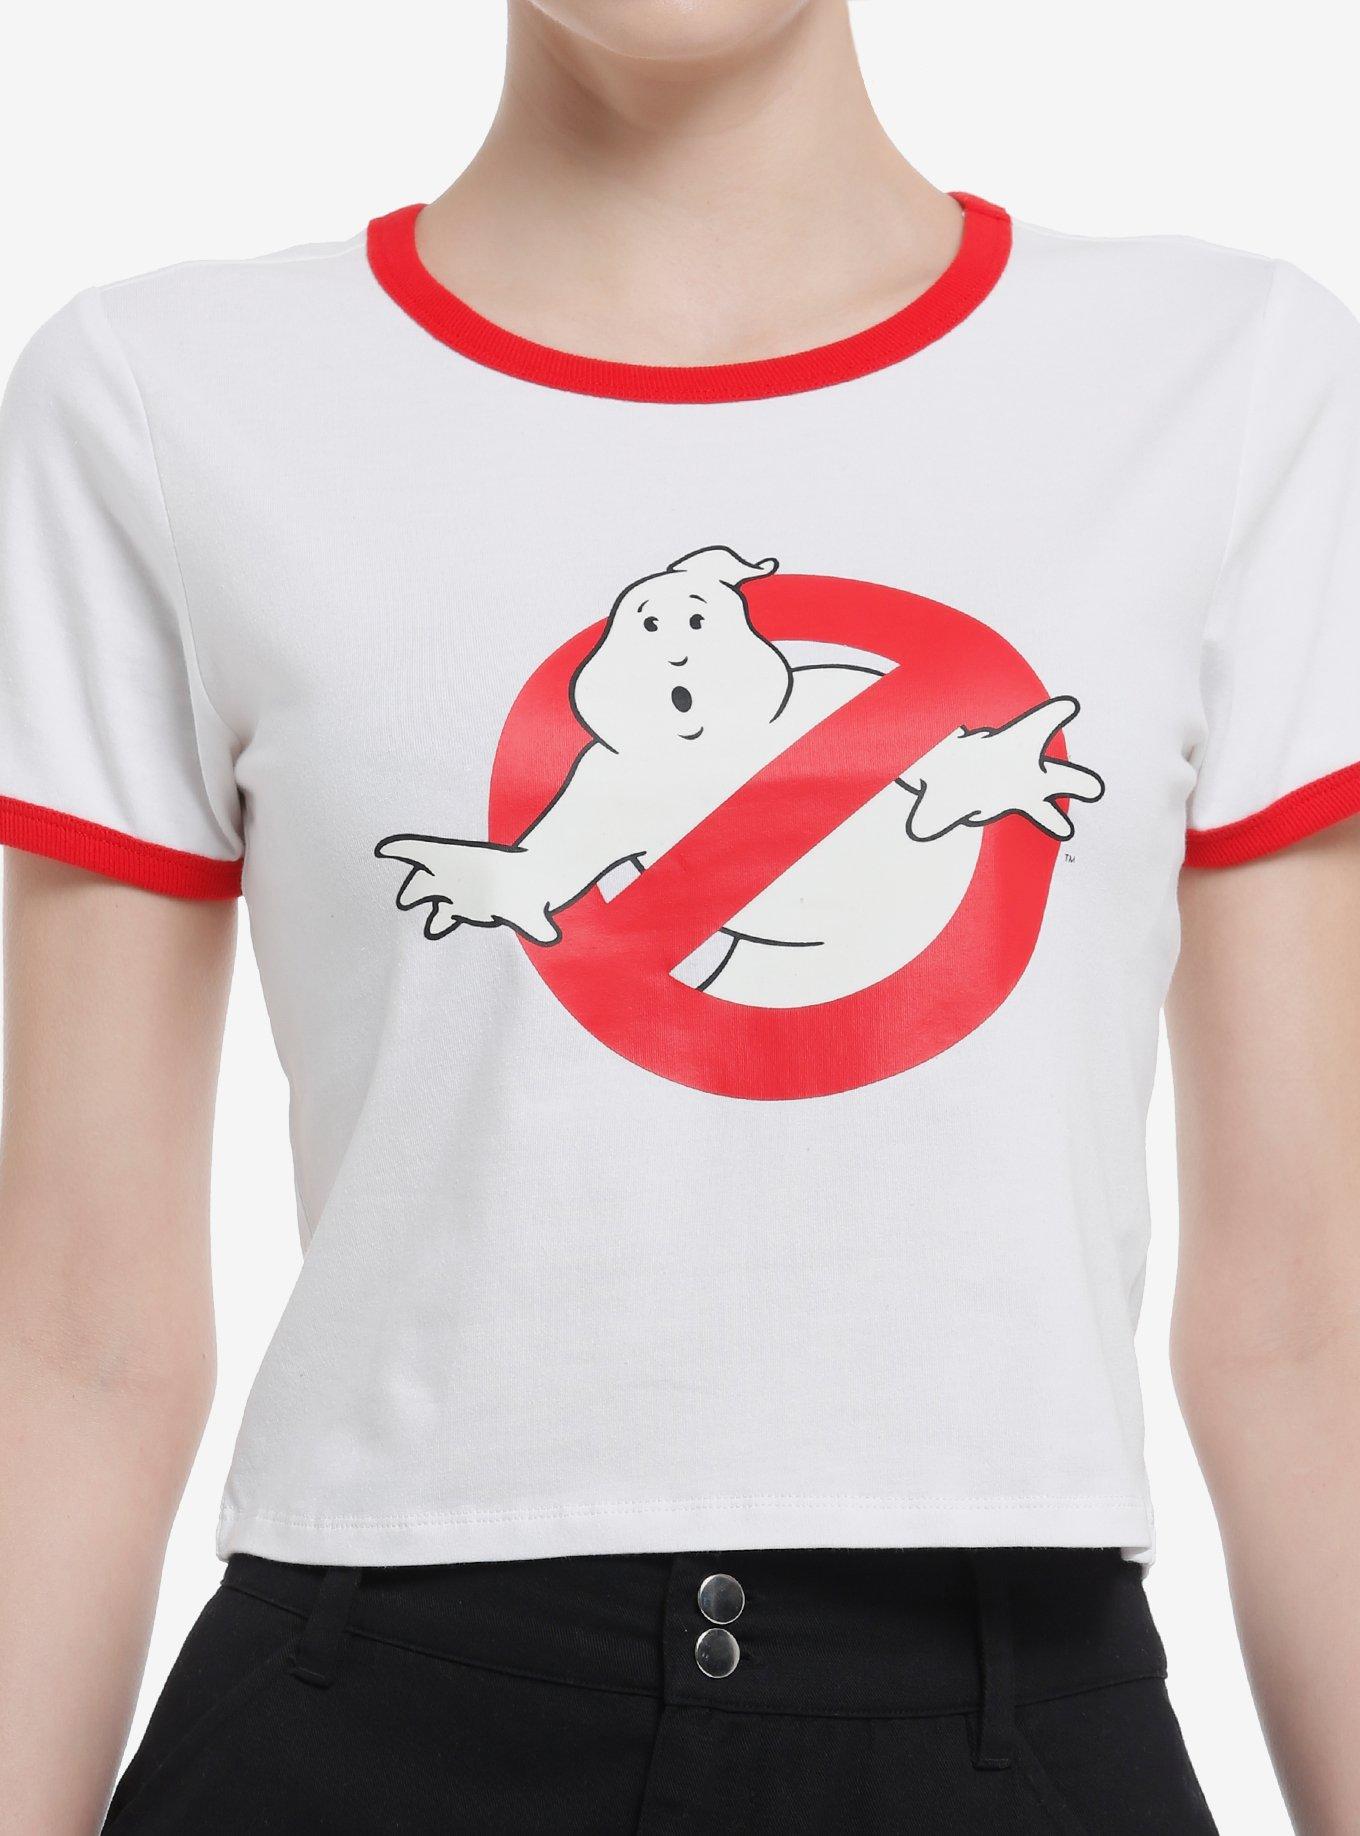 Her Universe Ghostbusters Logo Glow-In-The-Dark Baby Ringer T-Shirt, MULTI, hi-res